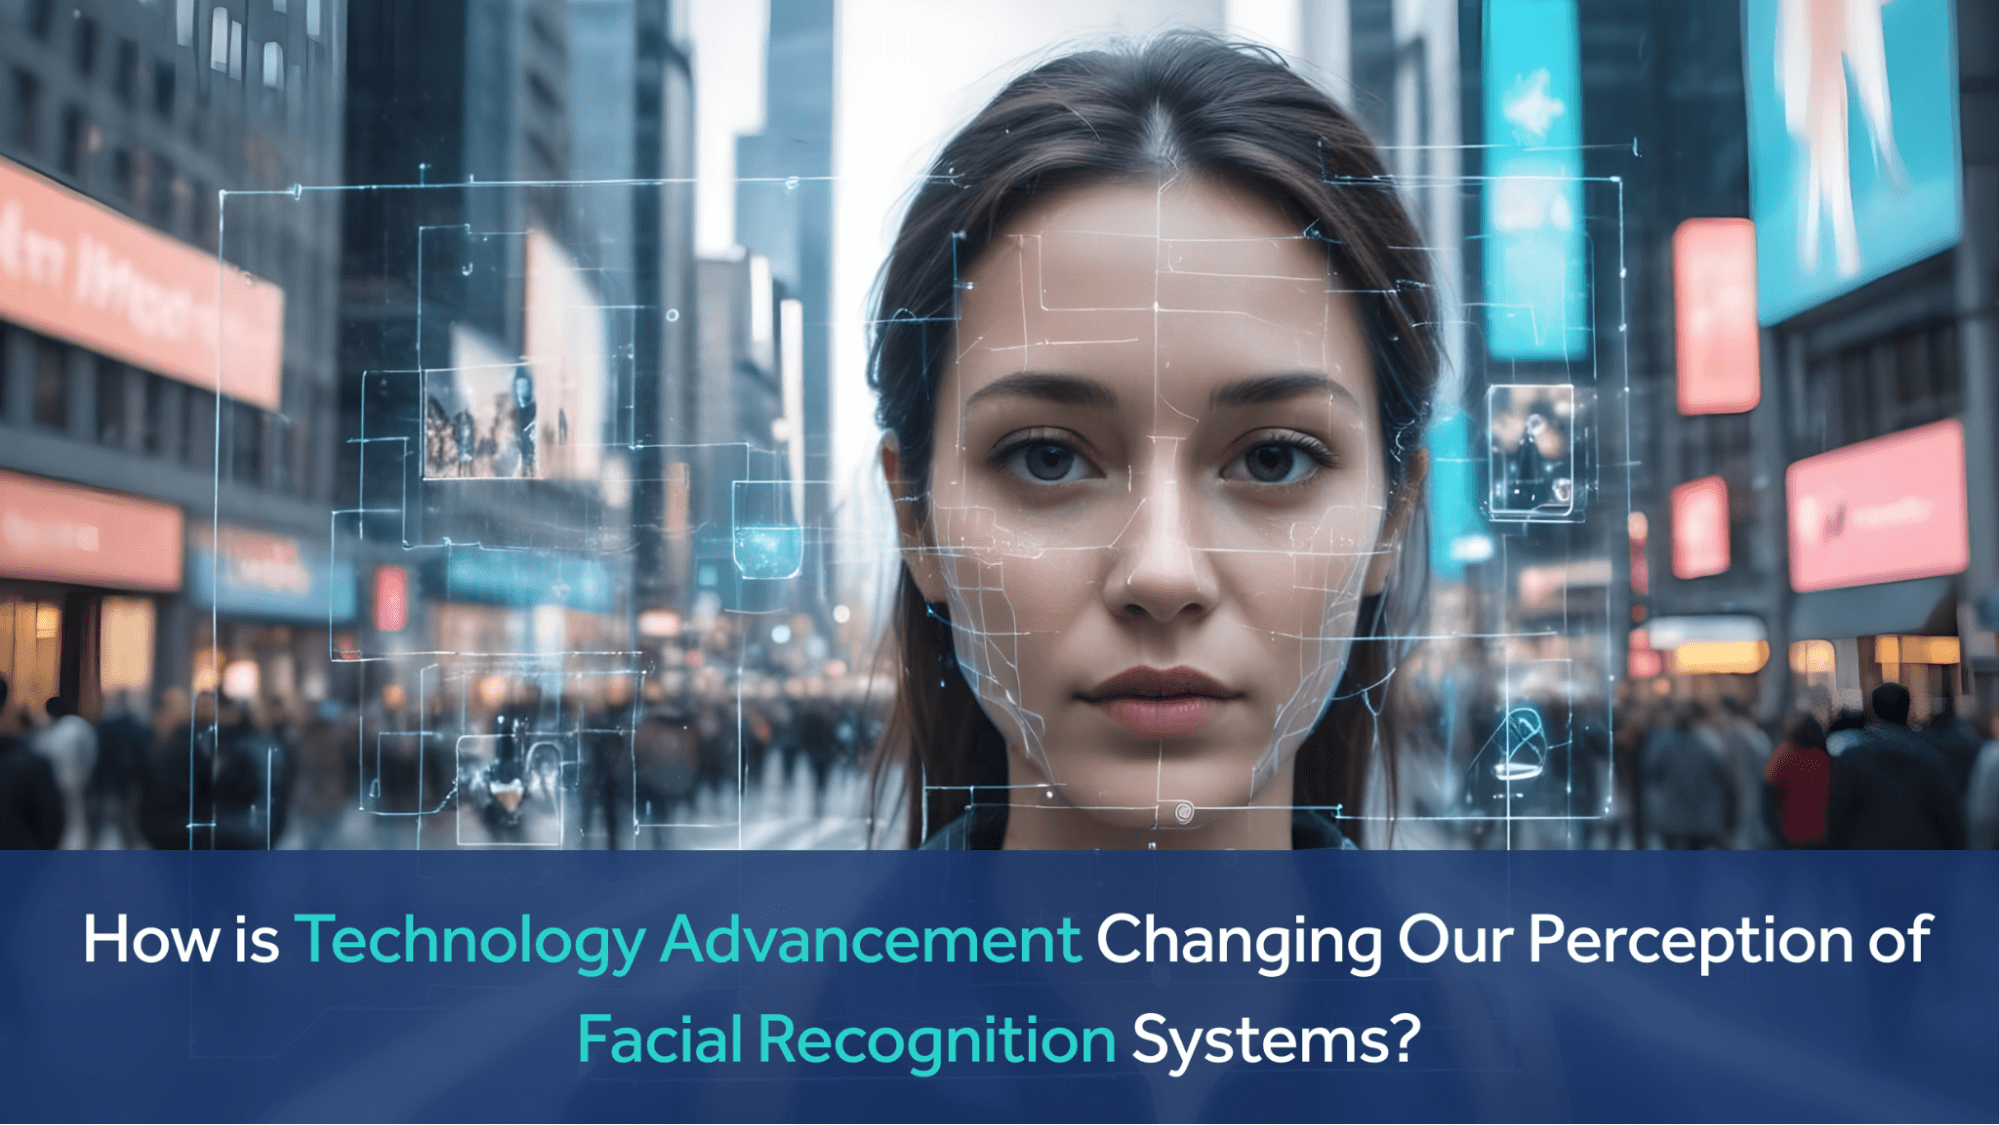 How is Technology Advancement Changing Our Perception of Facial Recognition Systems?